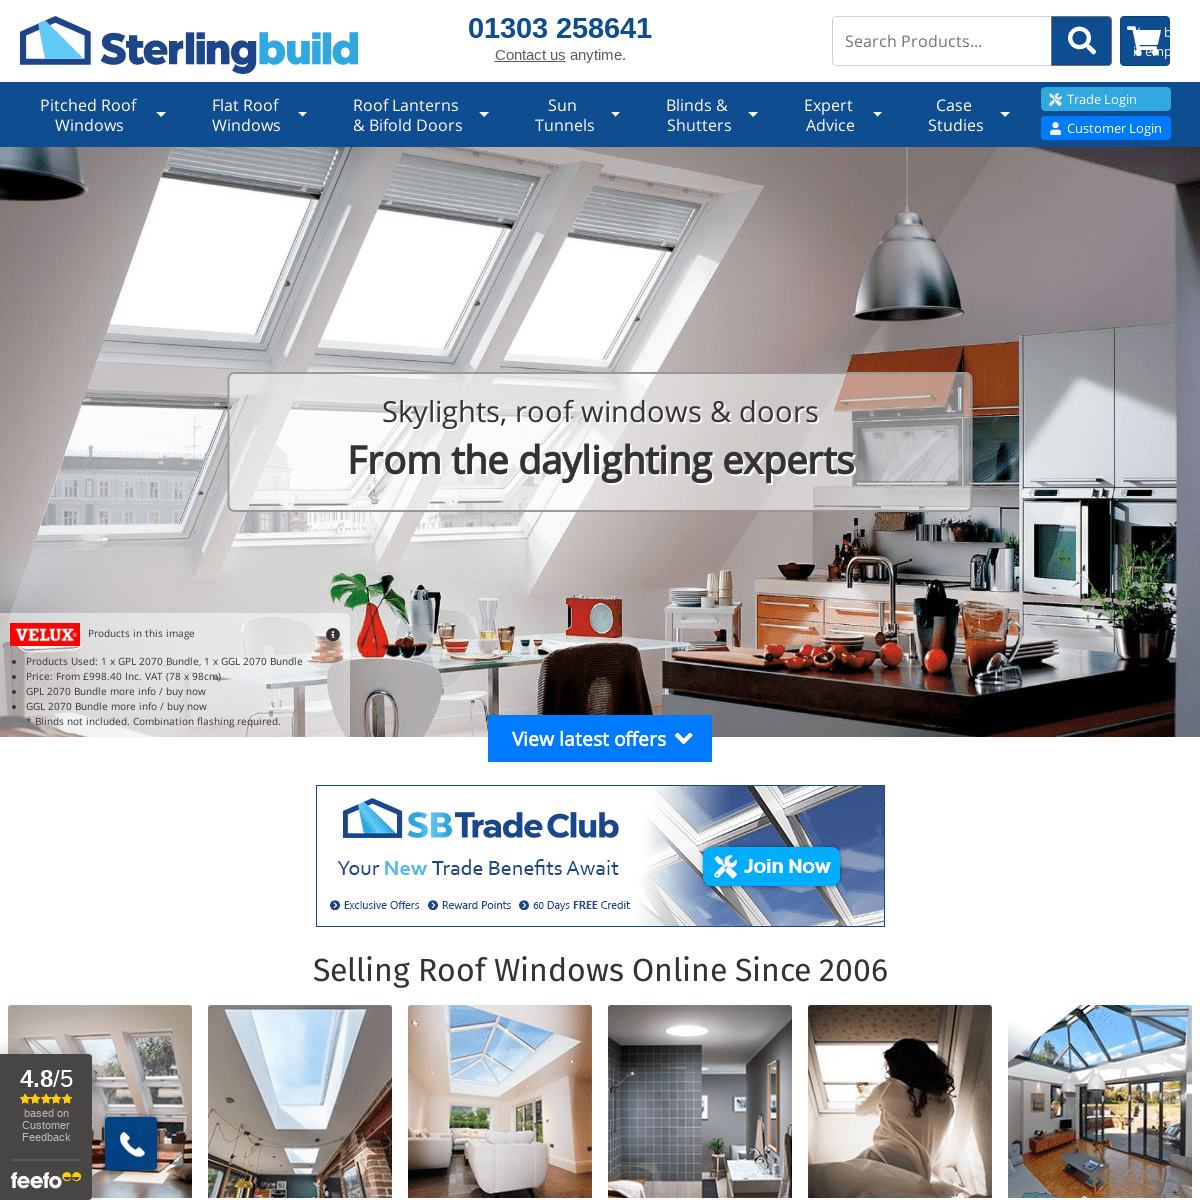 VELUX Windows, Rooflights & Lanterns at the Lowest Prices | Sterlingbuild